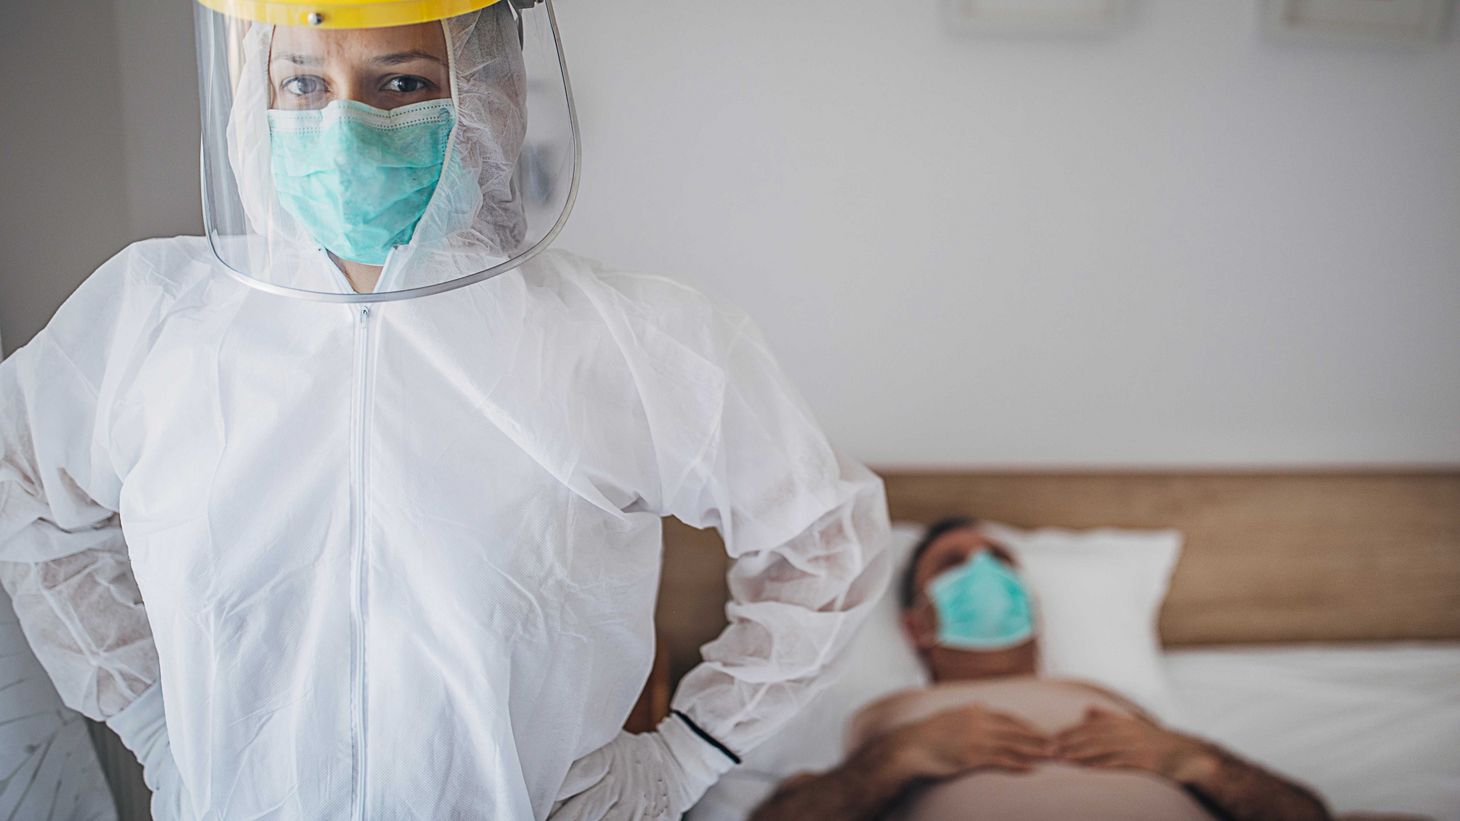 health care provider in personal protective equipment standing next to patient in bed wearing face mask